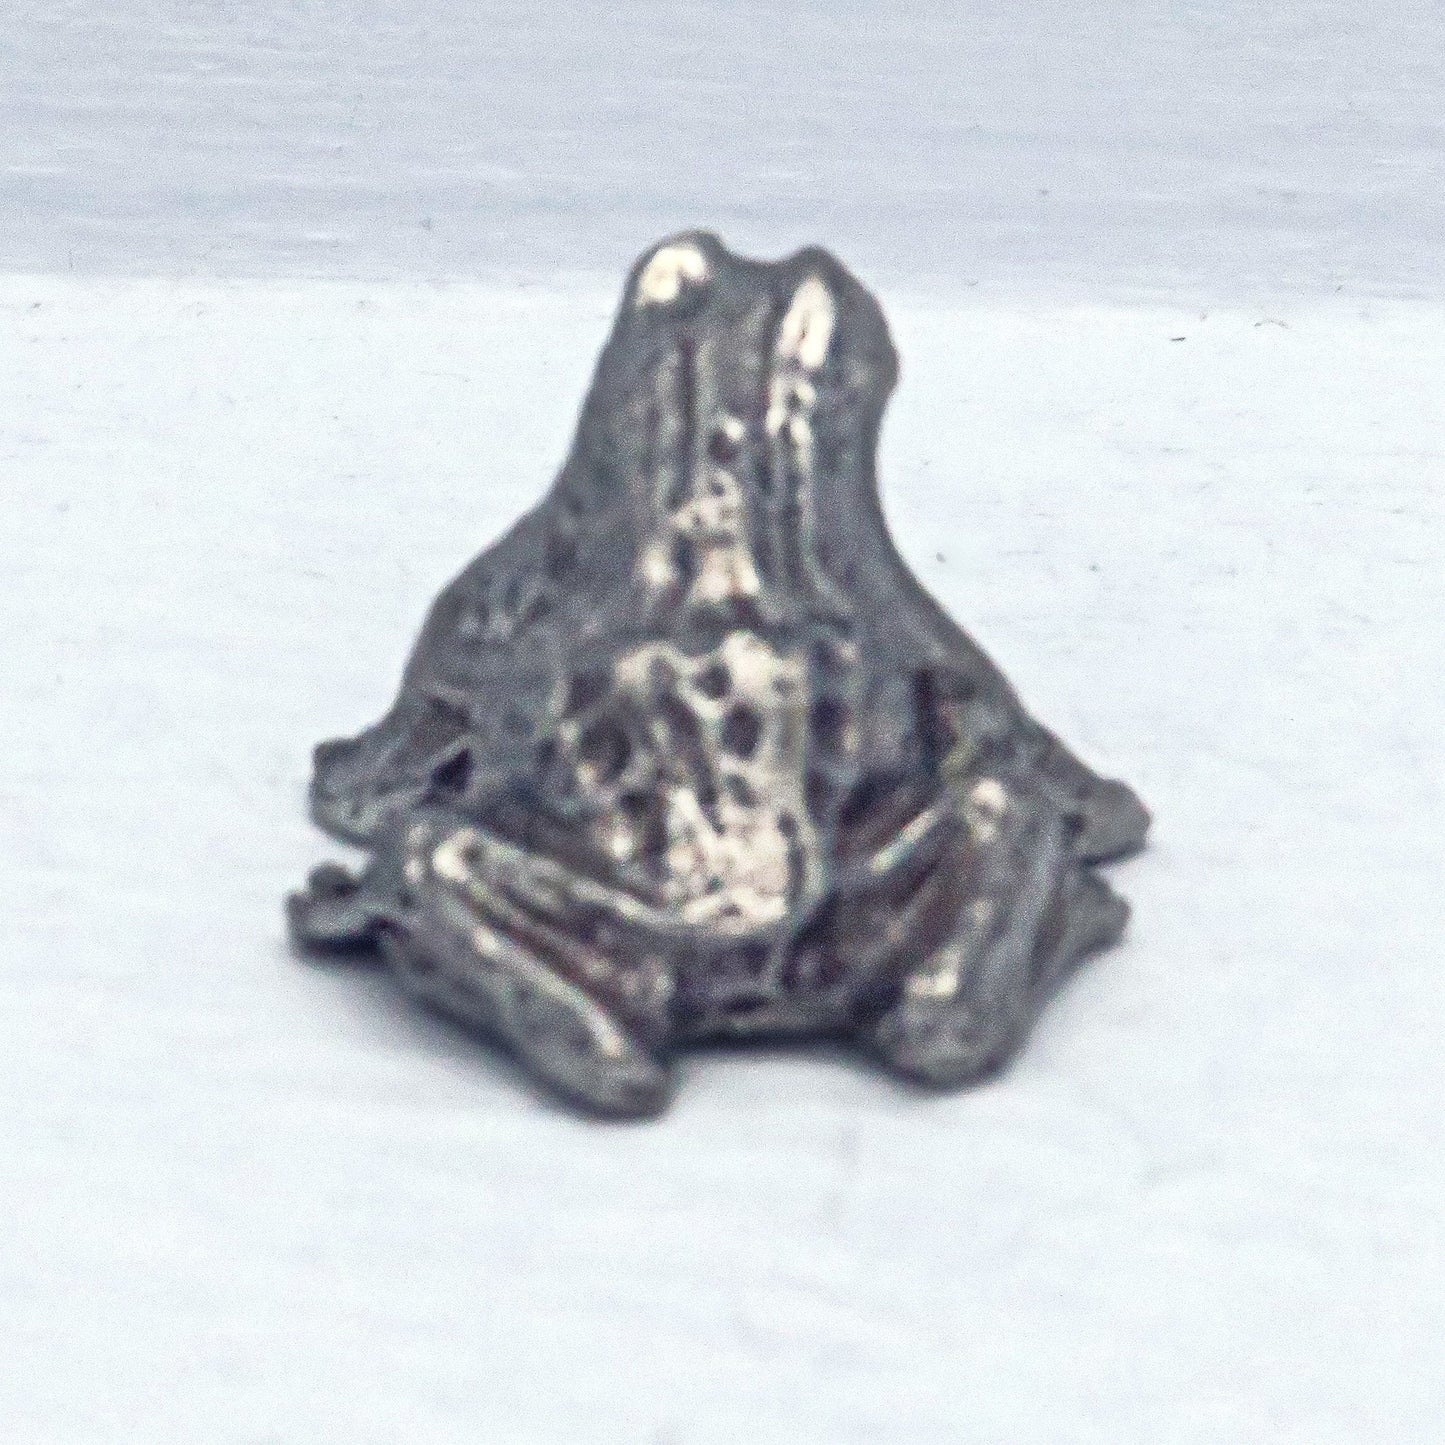 Vintage Pewter Frog Figurine / Pewter Decor / Miniature Toad Statue / Frog Lover Gift / Frog Decor / Gift for Toad Lover /  Toad Decor